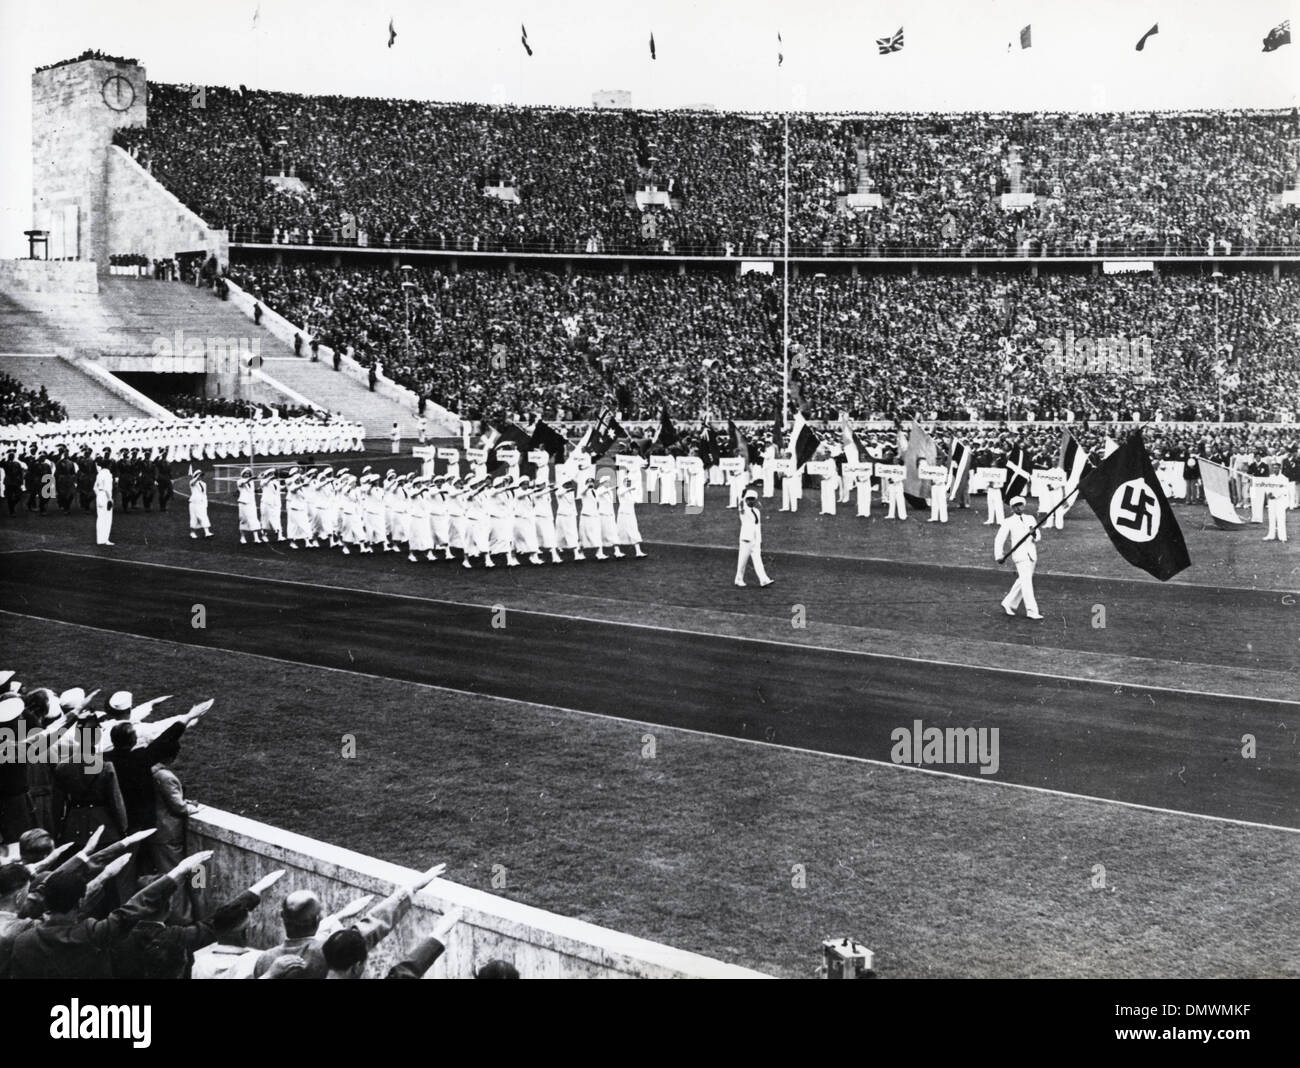 Aug. 1, 1936 - Berlin, Germany - On the opening day of the 1936 Berlin Olympic Games, the German team walks past the reviewing stand. (Credit Image: © KEYSTONE Pictures USA/ZUMAPRESS.com) Stock Photo